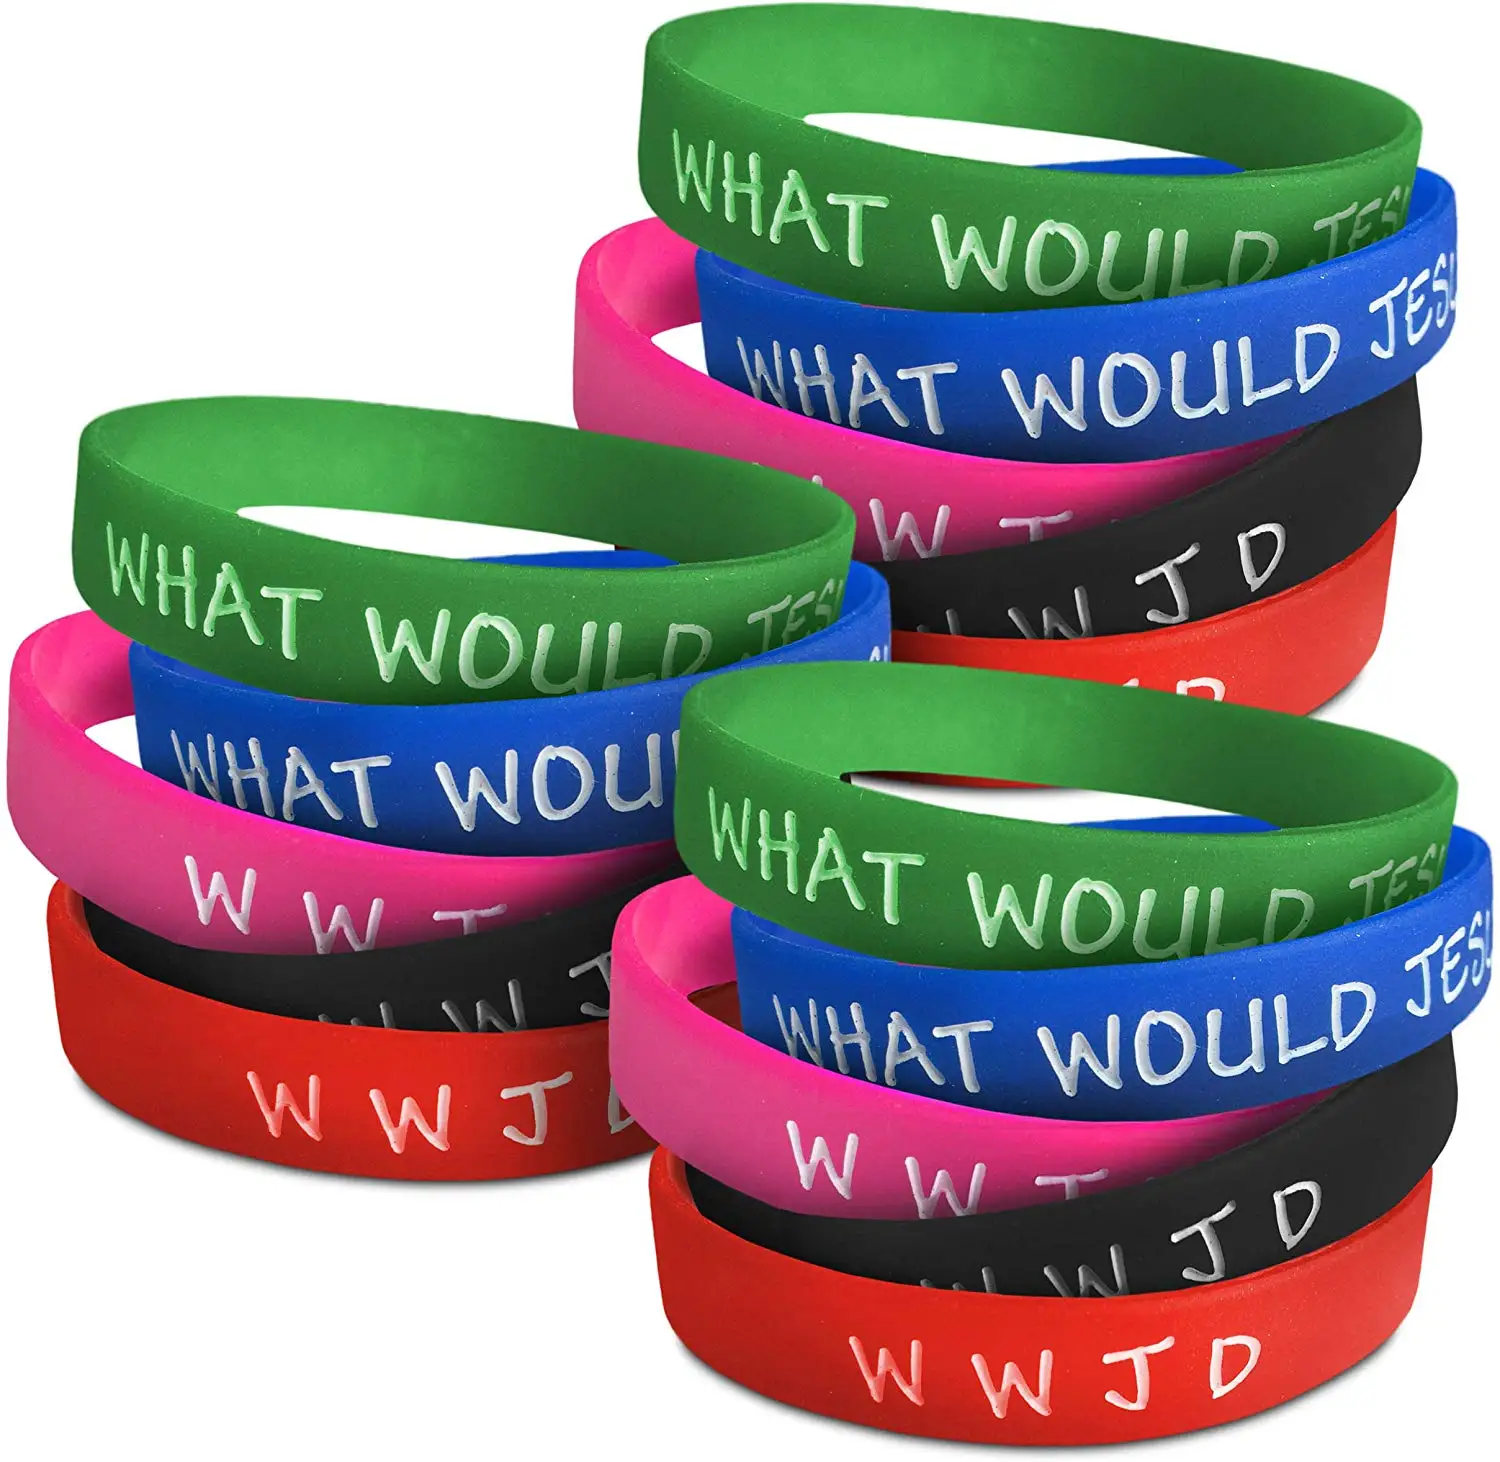 What would Jesus Do - W.W.J.D bracelet - Pack of 12 | SWANSON CHRISTIAN  PRODUCTS